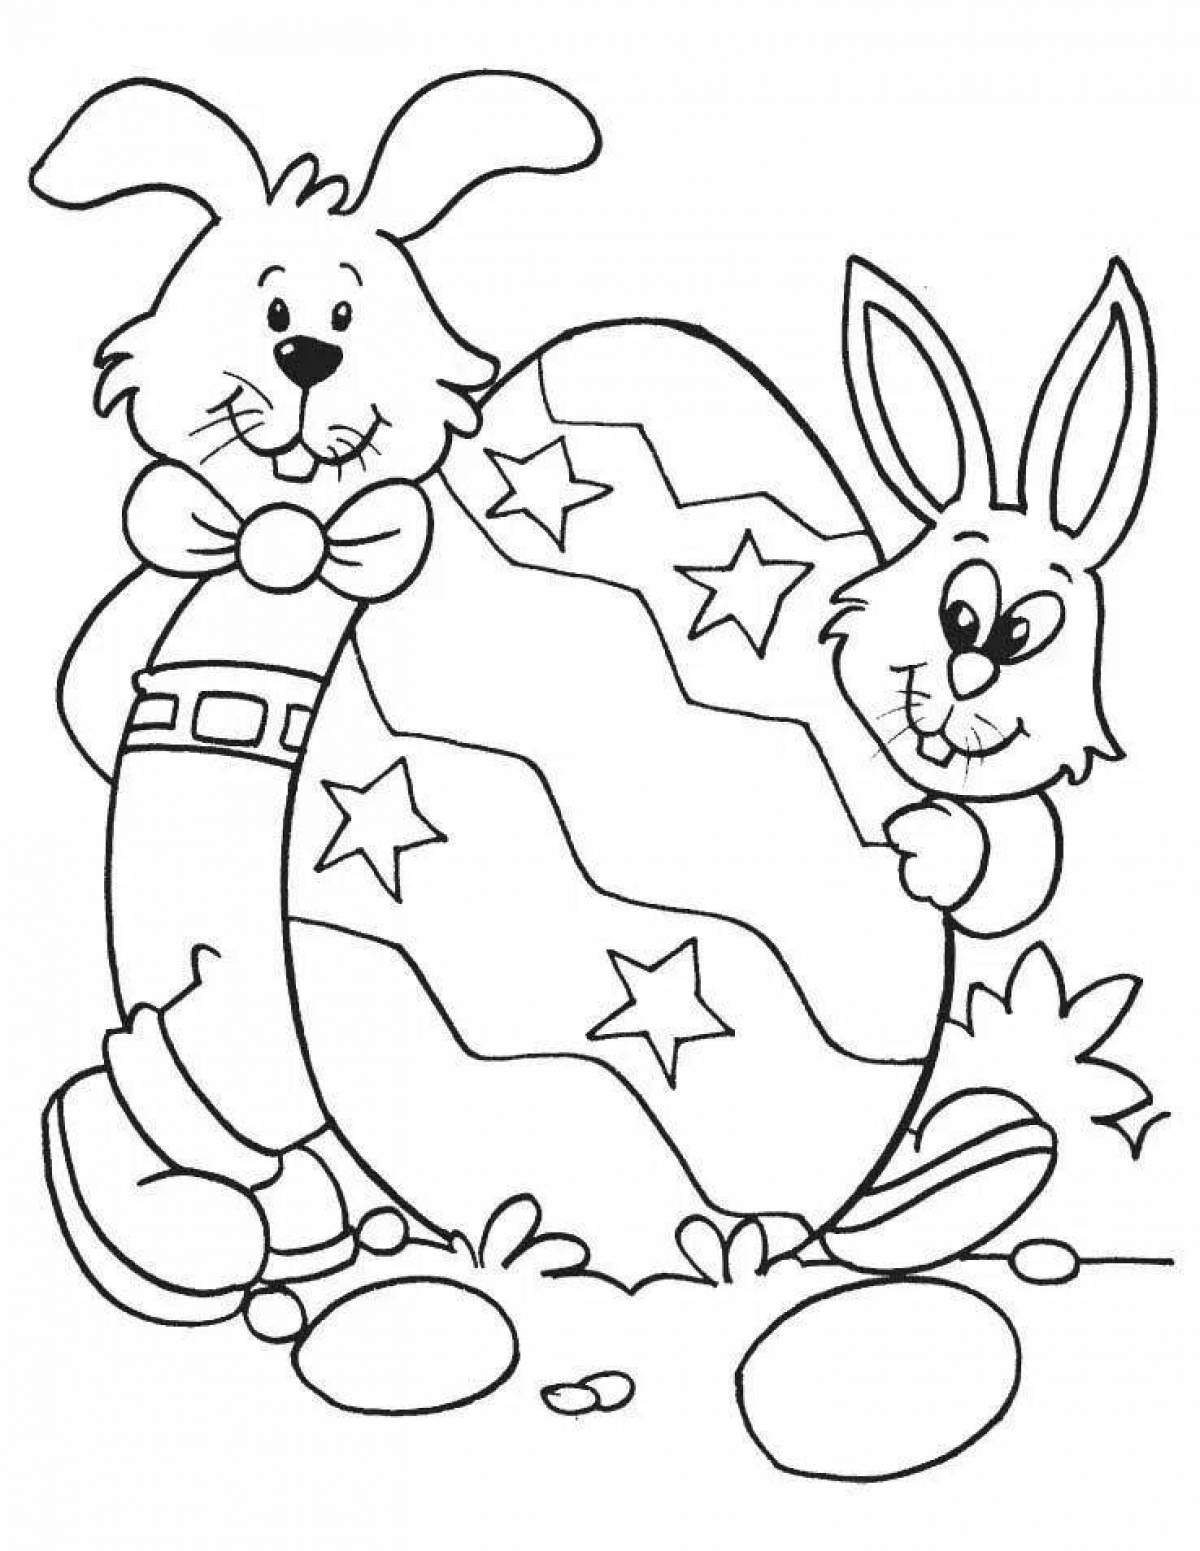 Sparkling Easter Bunny coloring book